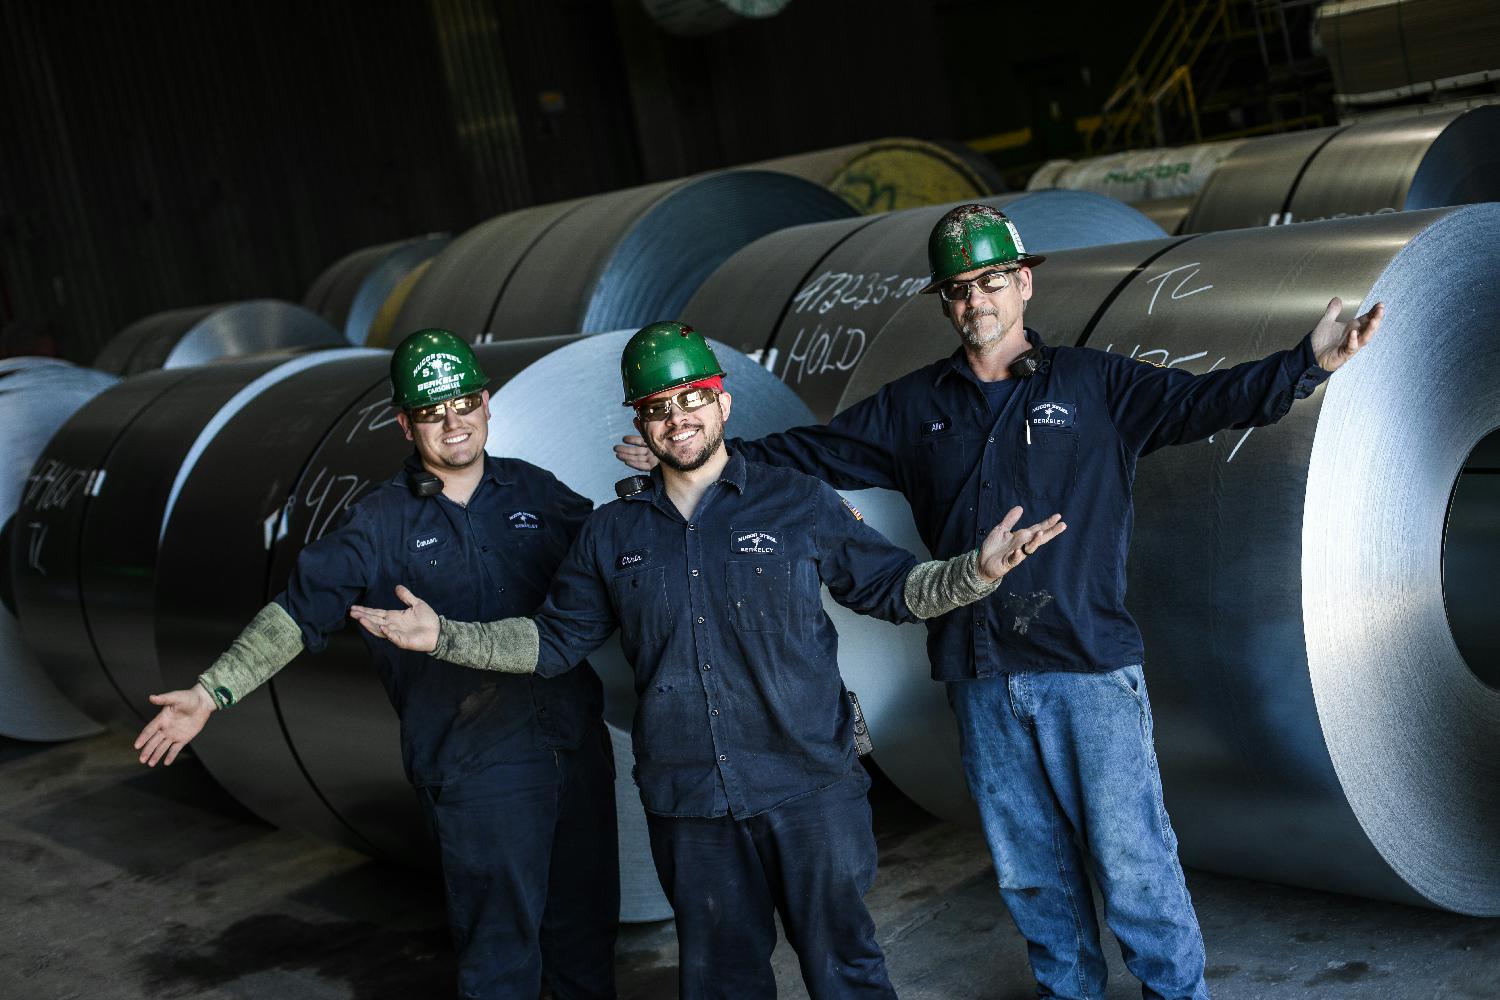 We are on a mission to become the world's safest steel company.